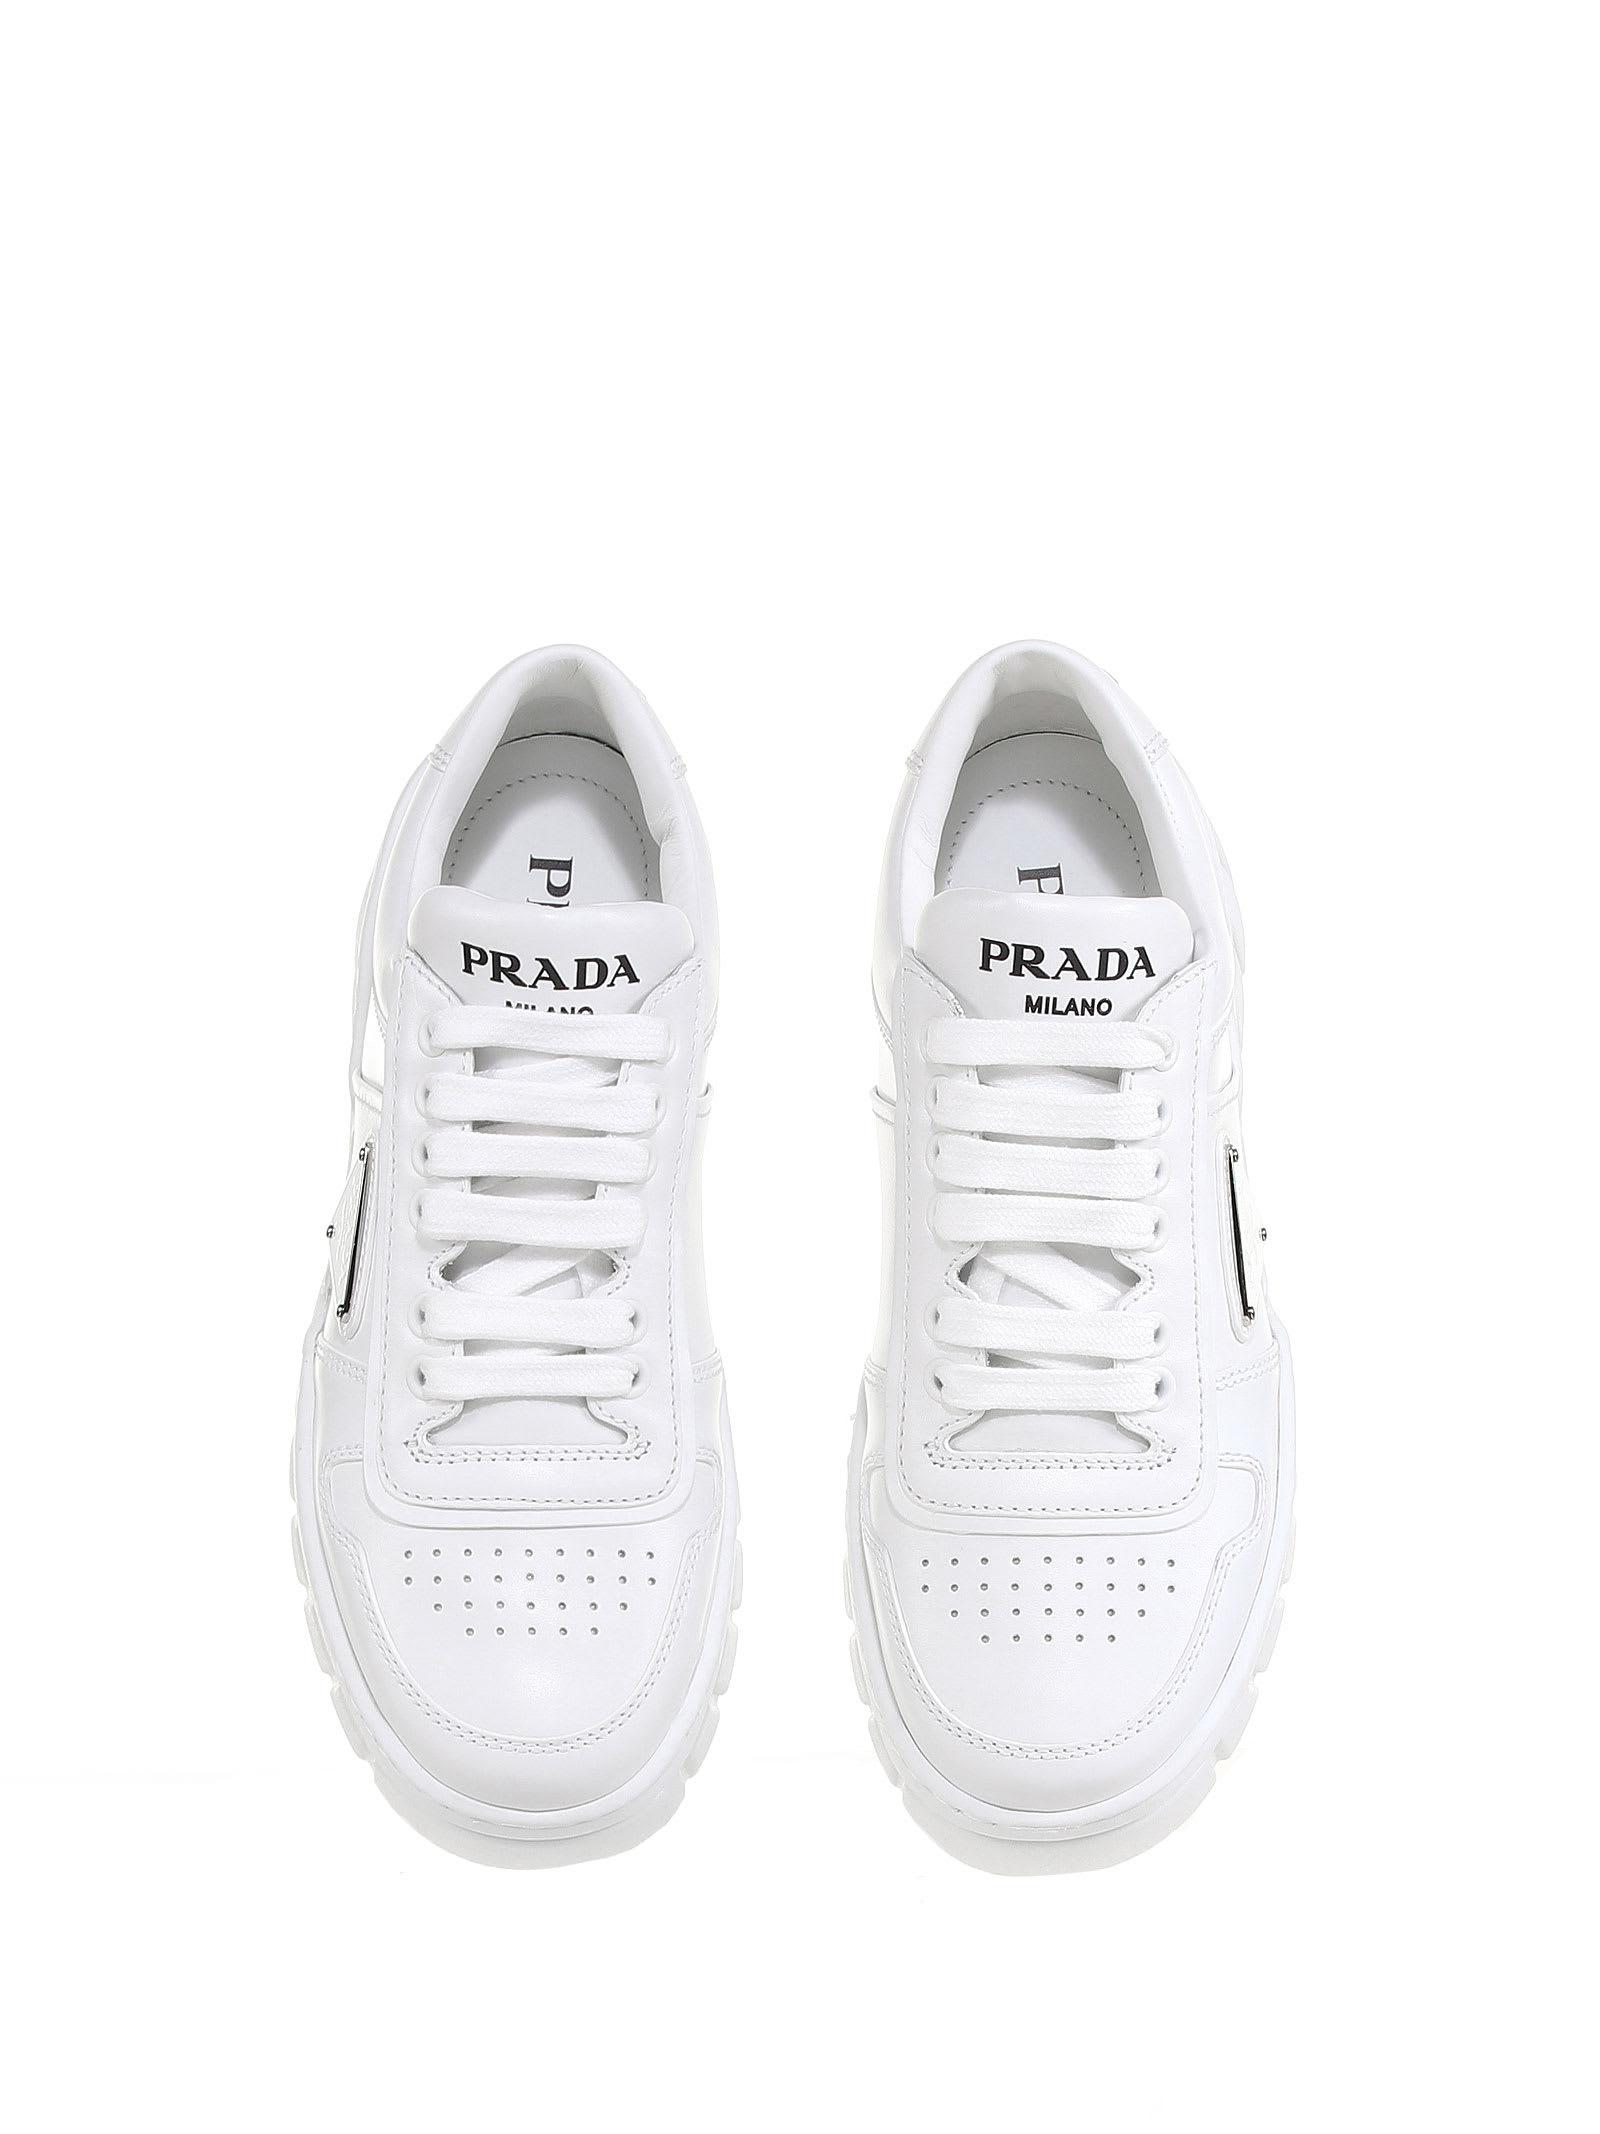 Prada Leather Sneaker With Geometric Sole in White | Lyst